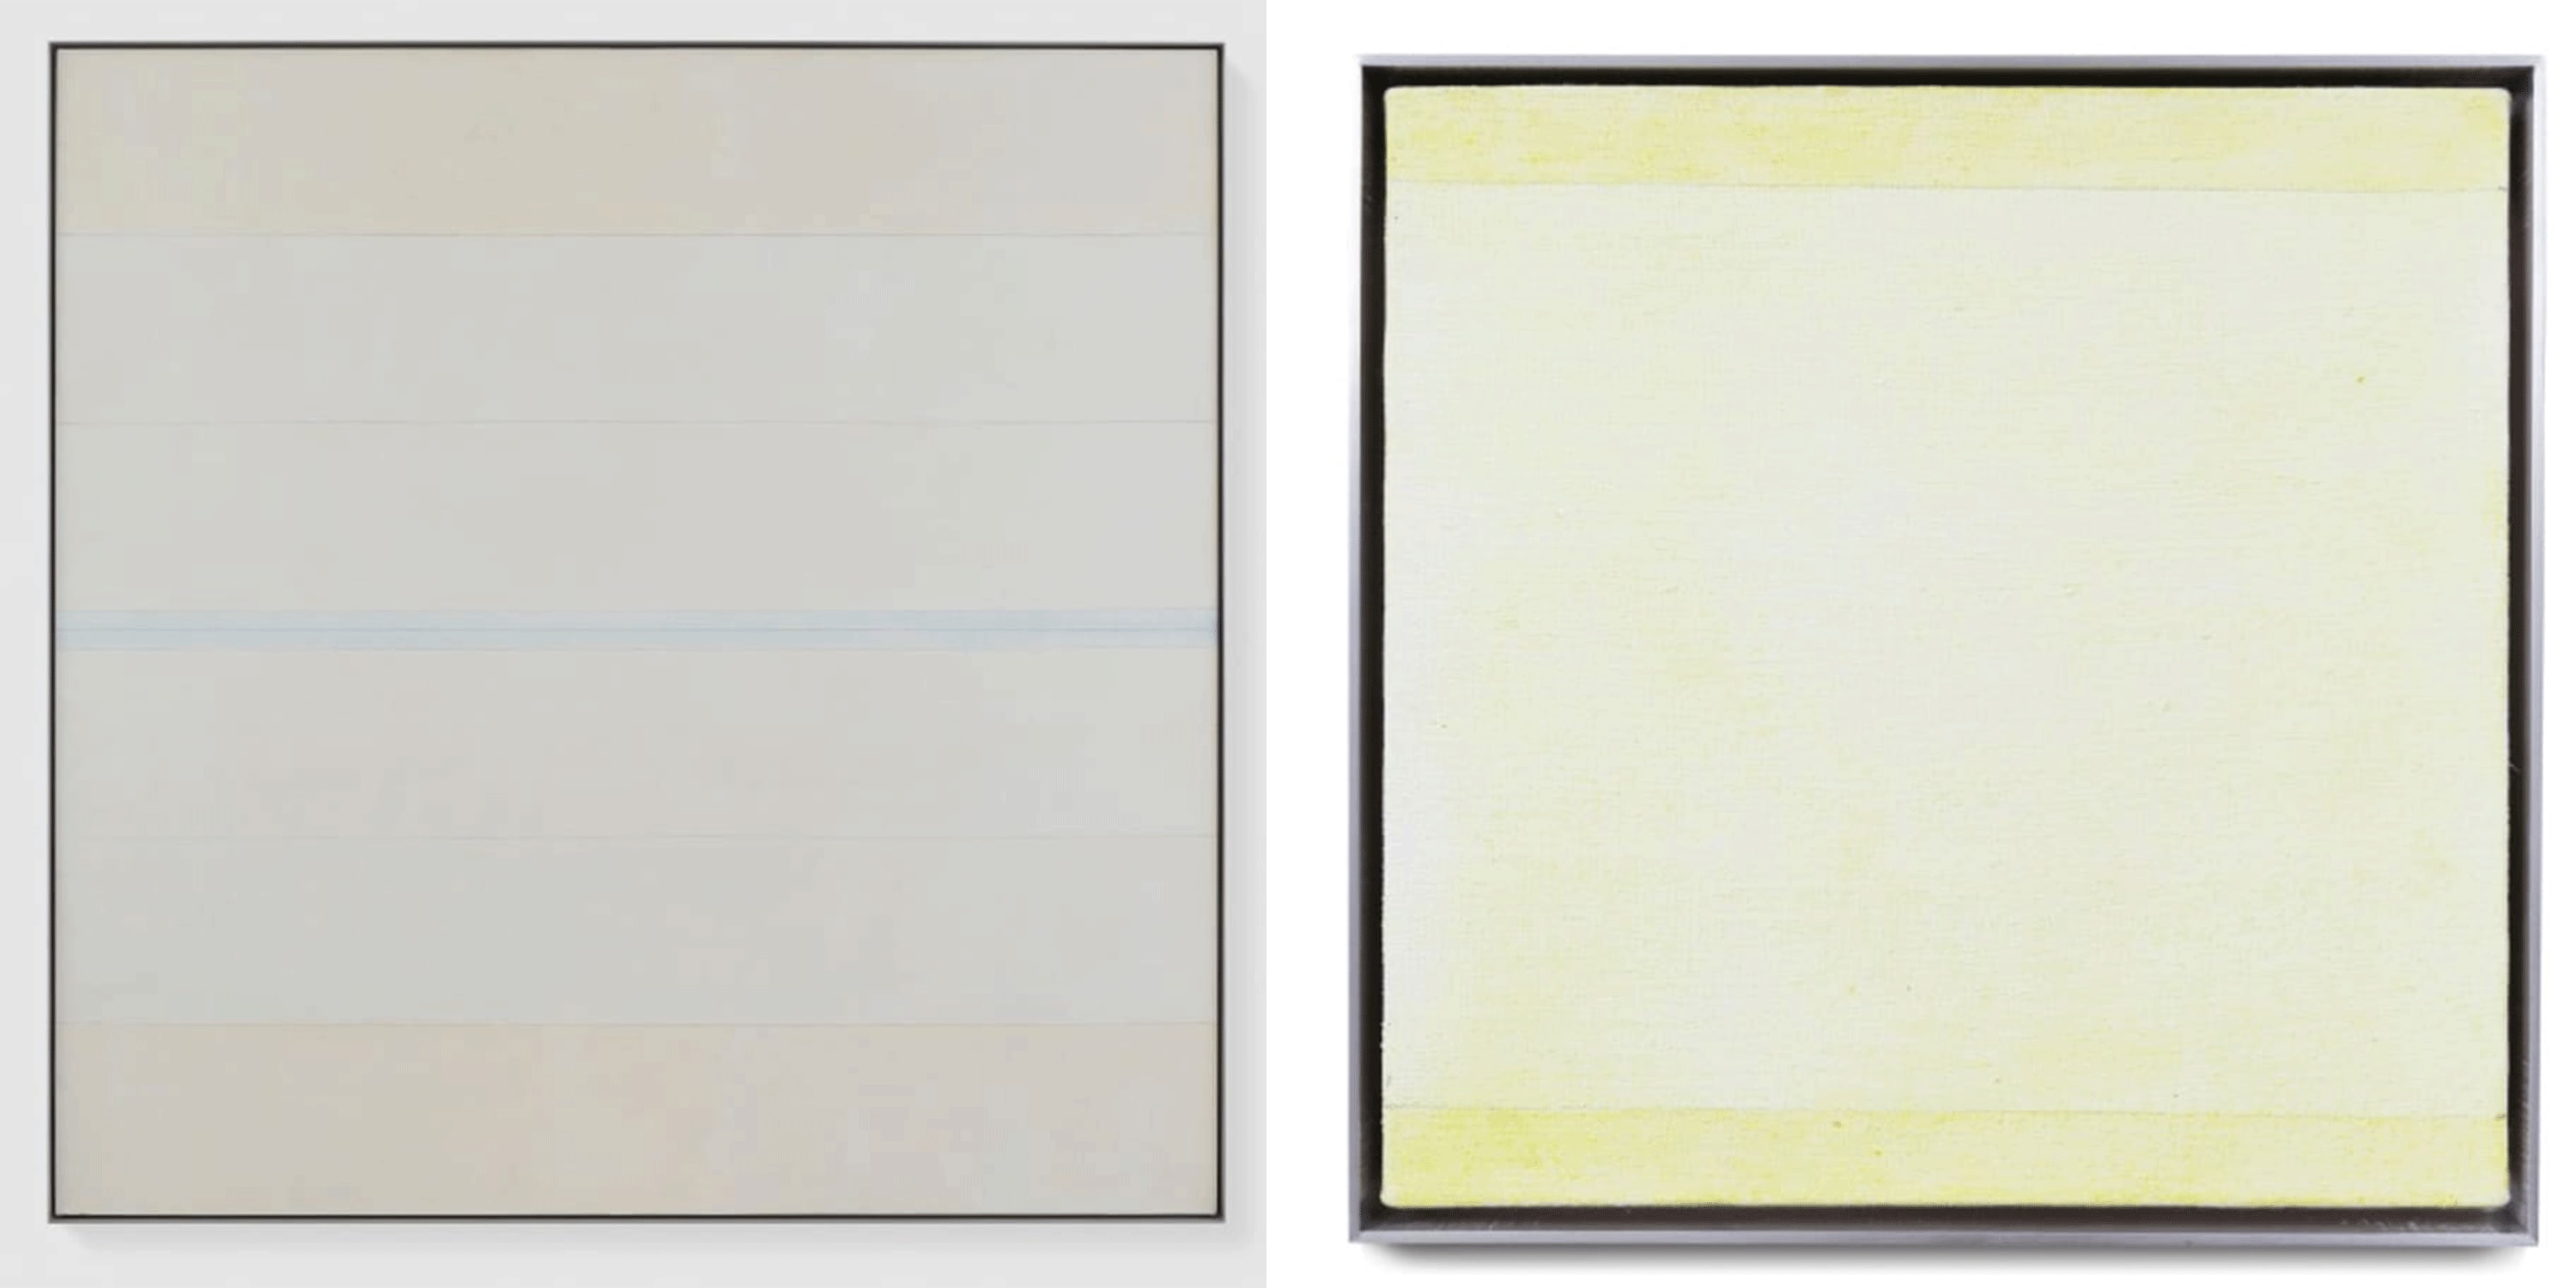 Left: Agnes Martin, Untitled #9, 2003. Exhibited by Mary Boone Gallery at Art Basel Miami Beach 2017. Right: Agnes Martin, Untitled, 2000 - 2004. Exhibited by Peter Freeman Inc. at Art Basel in Basel in 2016.